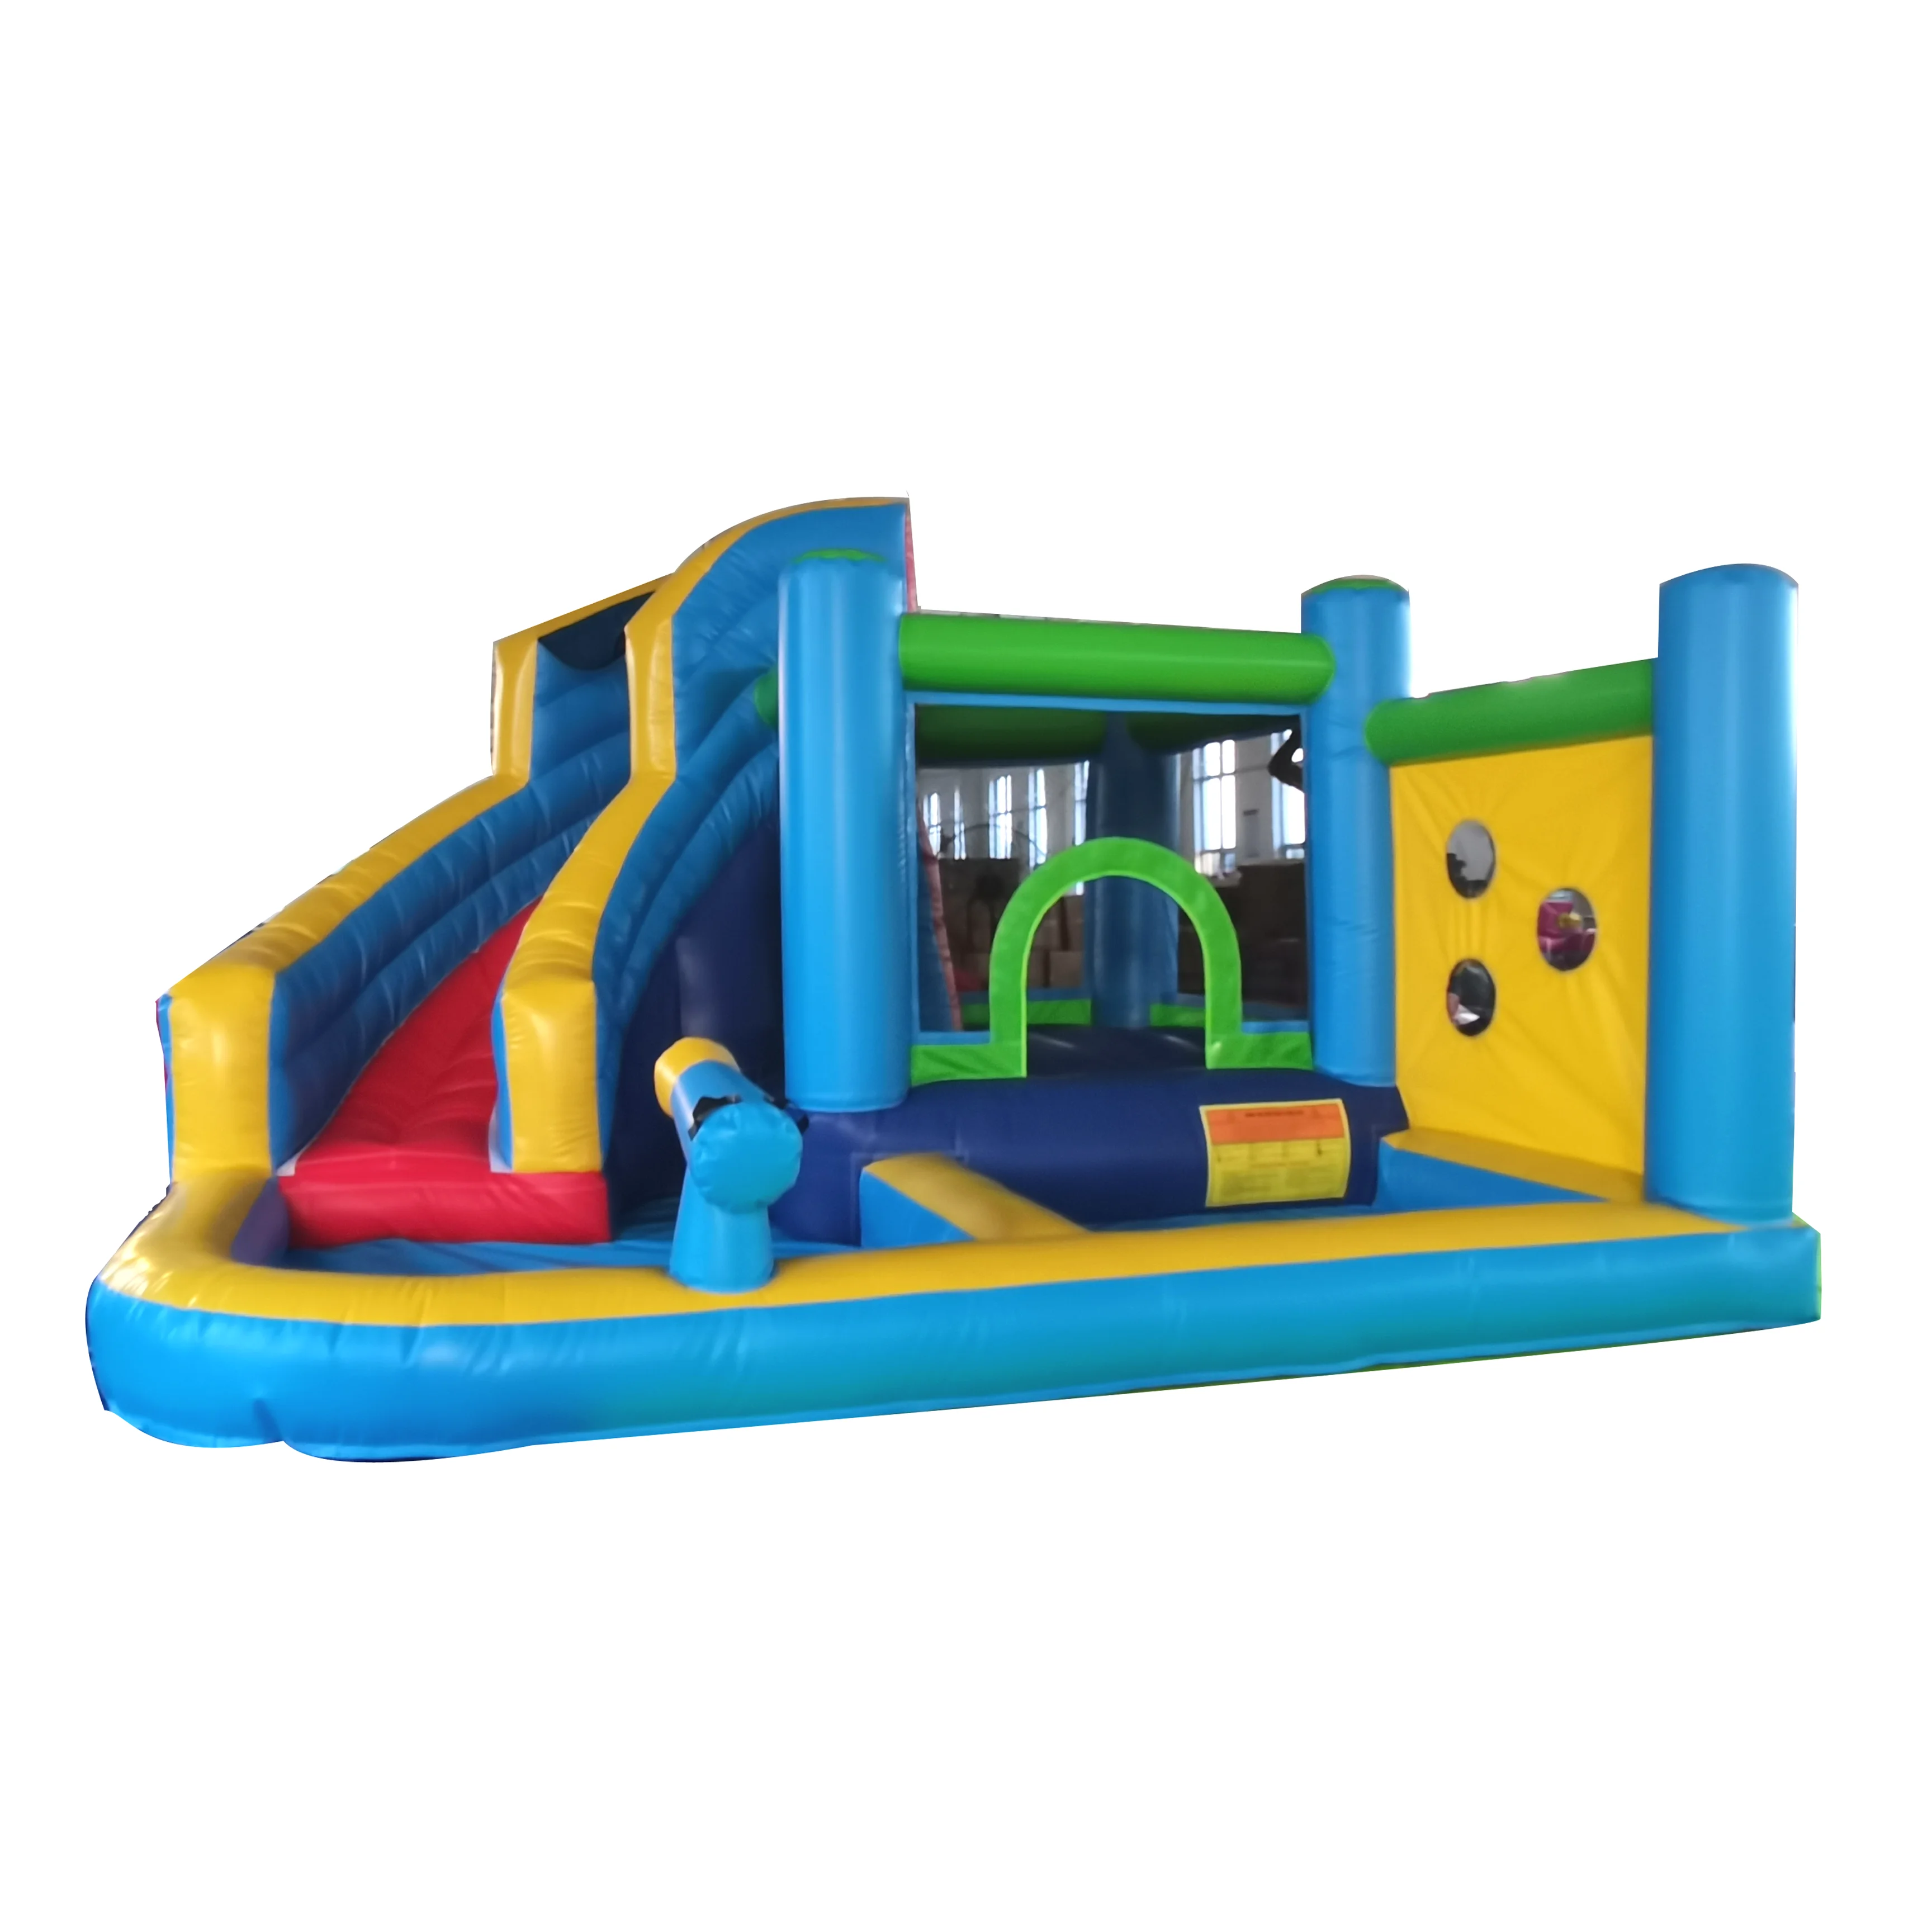 

Commercial Inflatable slide bouncer for rental water slide with pool backyard water play equipment inflatable games for kids